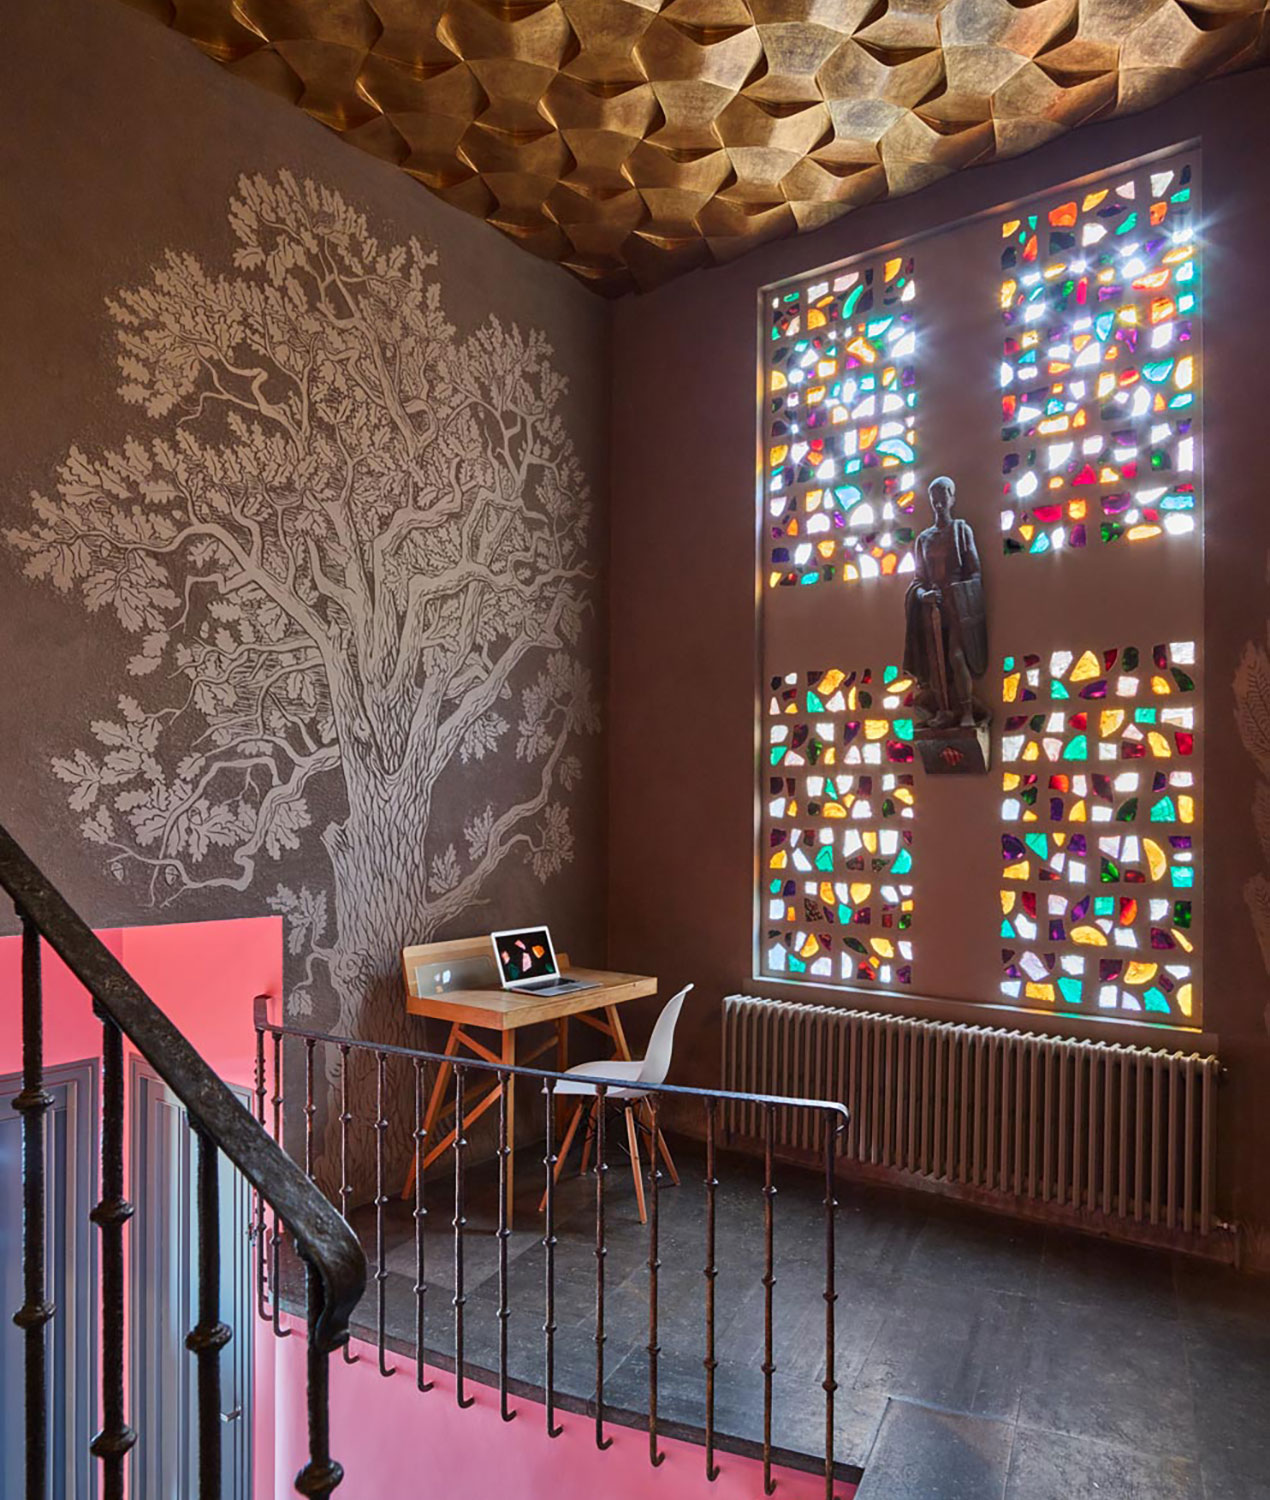 Casa creueta colourful entrance hall with stained glass windows and etched wall art